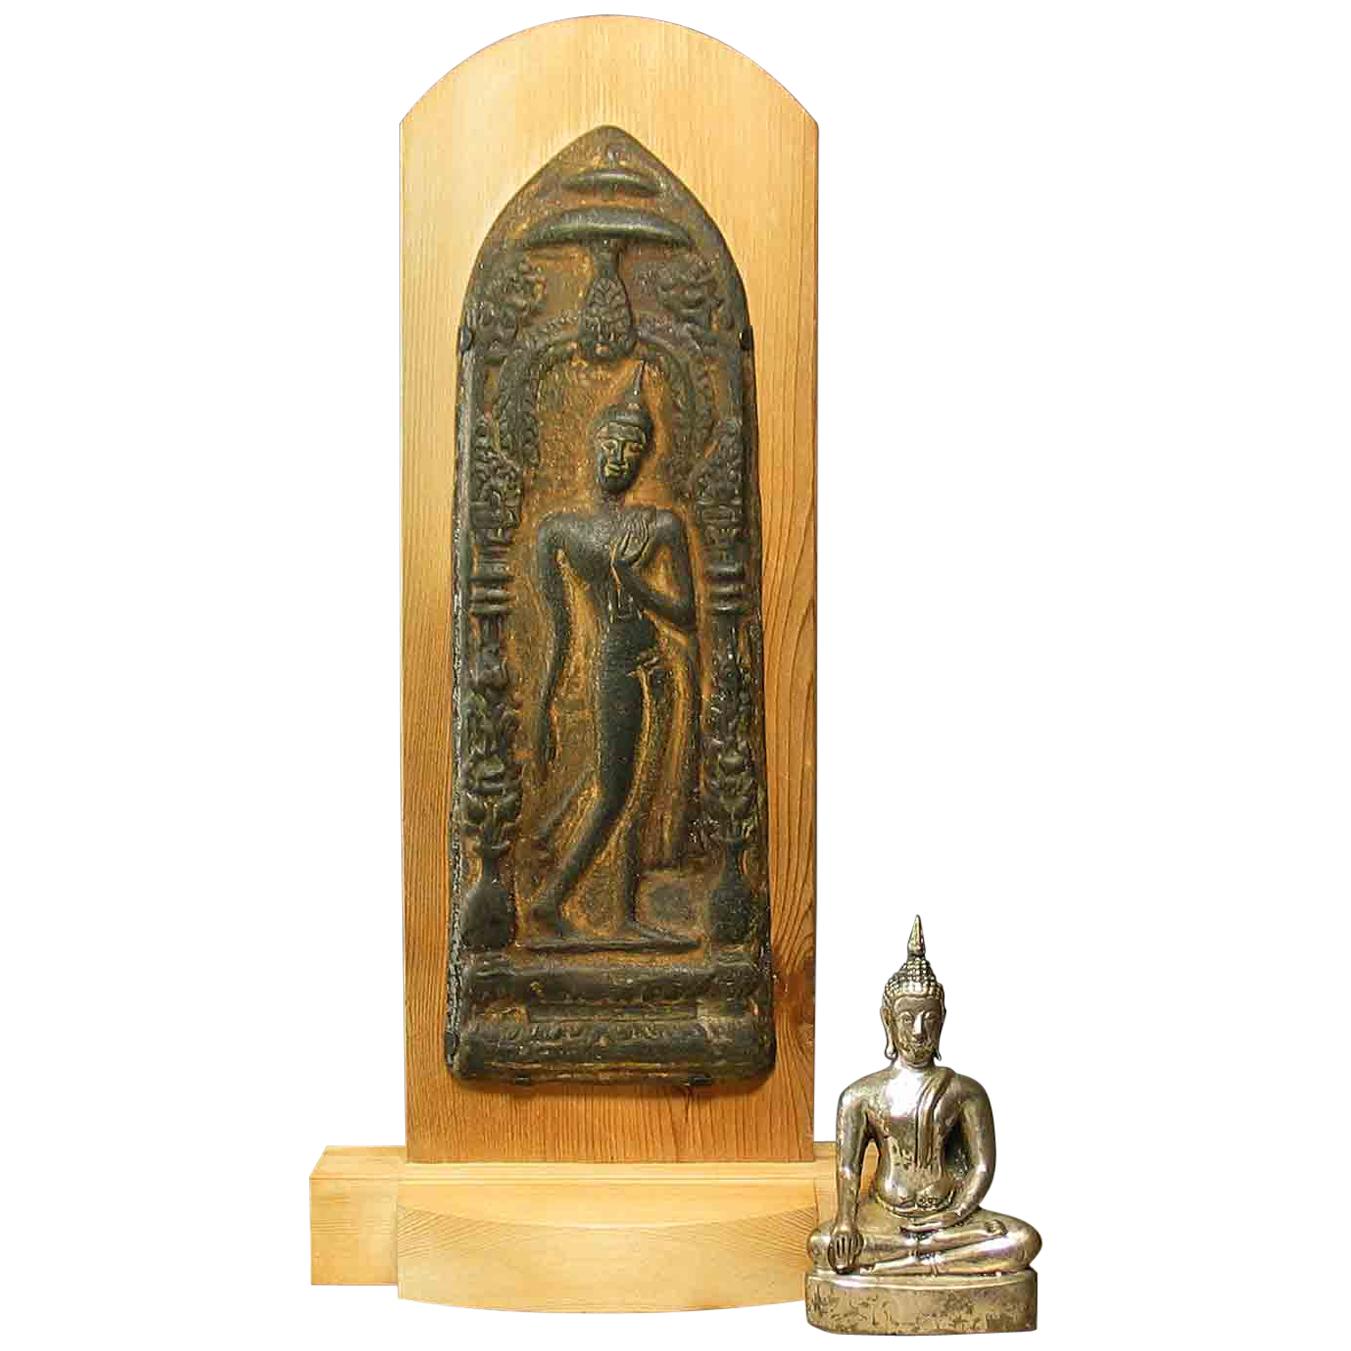 Votive Plaque with Walking Buddha in Sukhothai Style and Silvered Seated Buddha